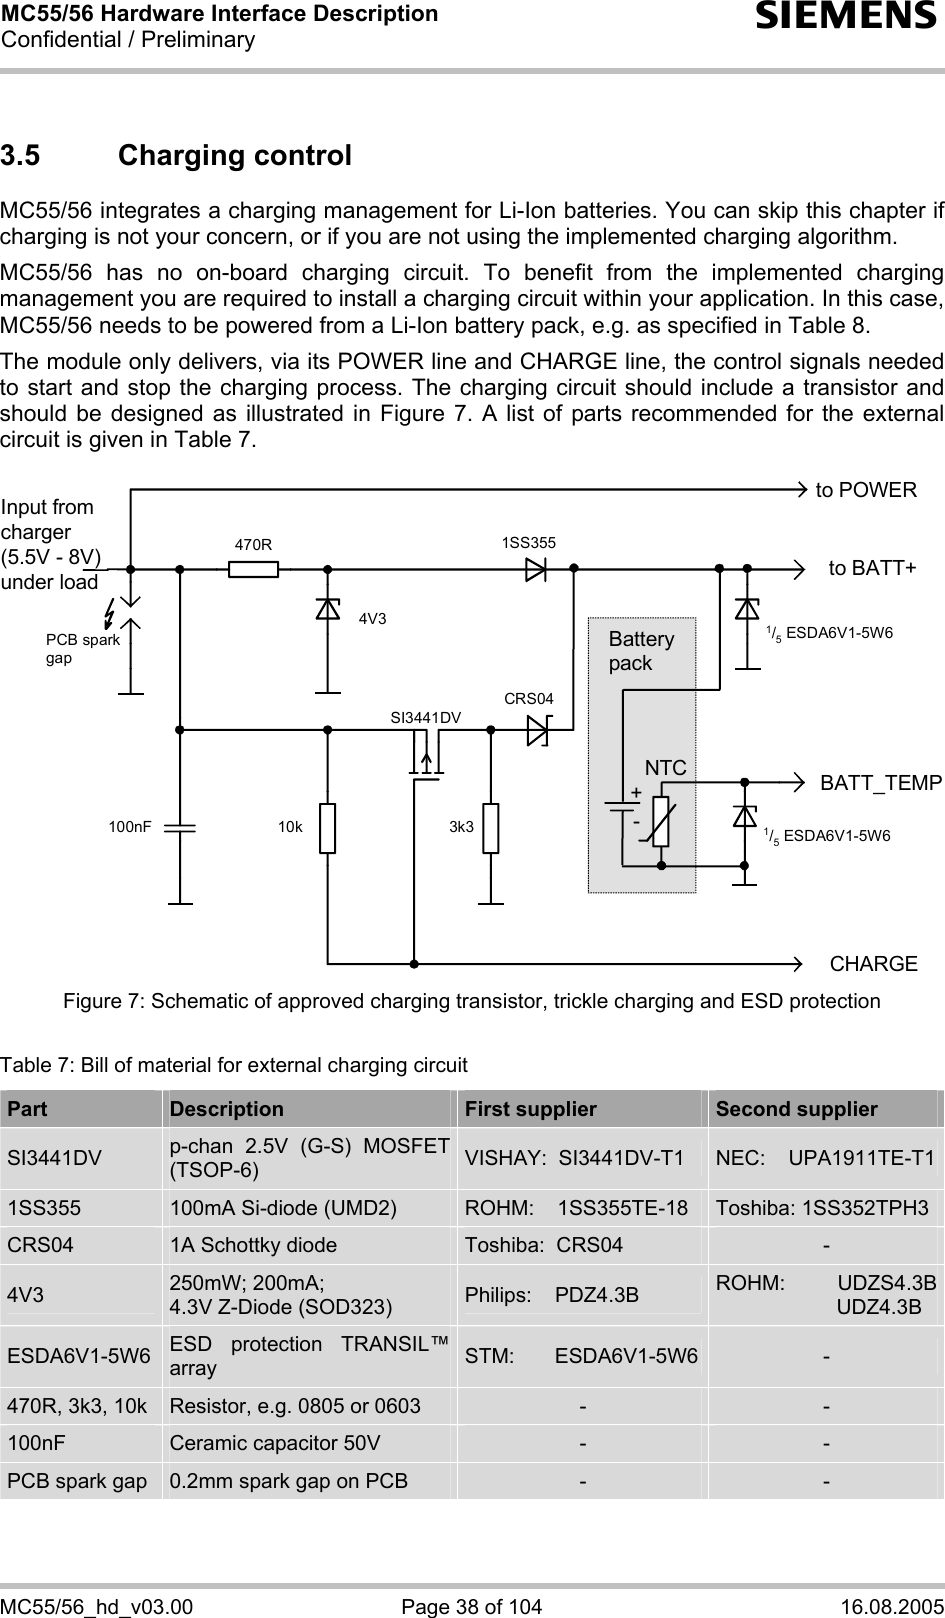 MC55/56 Hardware Interface Description Confidential / Preliminary s MC55/56_hd_v03.00  Page 38 of 104  16.08.2005 3.5 Charging control MC55/56 integrates a charging management for Li-Ion batteries. You can skip this chapter if charging is not your concern, or if you are not using the implemented charging algorithm.  MC55/56 has no on-board charging circuit. To benefit from the implemented charging management you are required to install a charging circuit within your application. In this case, MC55/56 needs to be powered from a Li-Ion battery pack, e.g. as specified in Table 8.  The module only delivers, via its POWER line and CHARGE line, the control signals needed to start and stop the charging process. The charging circuit should include a transistor and should be designed as illustrated in Figure 7. A list of parts recommended for the external circuit is given in Table 7.  to BATT+Input fromcharger(5.5V - 8V)under loadCHARGE470R 1SS3553k3100nF 10kSI3441DV4V3 1/5 ESDA6V1-5W6to POWERBATT_TEMP1/5 ESDA6V1-5W6NTC+Battery packPCB spark gapCRS04- Figure 7: Schematic of approved charging transistor, trickle charging and ESD protection  Table 7: Bill of material for external charging circuit Part  Description  First supplier  Second supplier SI3441DV  p-chan 2.5V (G-S) MOSFET (TSOP-6)  VISHAY:  SI3441DV-T1  NEC:    UPA1911TE-T11SS355  100mA Si-diode (UMD2)  ROHM:    1SS355TE-18  Toshiba: 1SS352TPH3 CRS04  1A Schottky diode   Toshiba:  CRS04  - 4V3  250mW; 200mA; 4.3V Z-Diode (SOD323)  Philips:    PDZ4.3B  ROHM: UDZS4.3B                     UDZ4.3B ESDA6V1-5W6  ESD protection TRANSIL™ array  STM:       ESDA6V1-5W6  - 470R, 3k3, 10k  Resistor, e.g. 0805 or 0603  -  - 100nF  Ceramic capacitor 50V  -  - PCB spark gap  0.2mm spark gap on PCB  -  - 